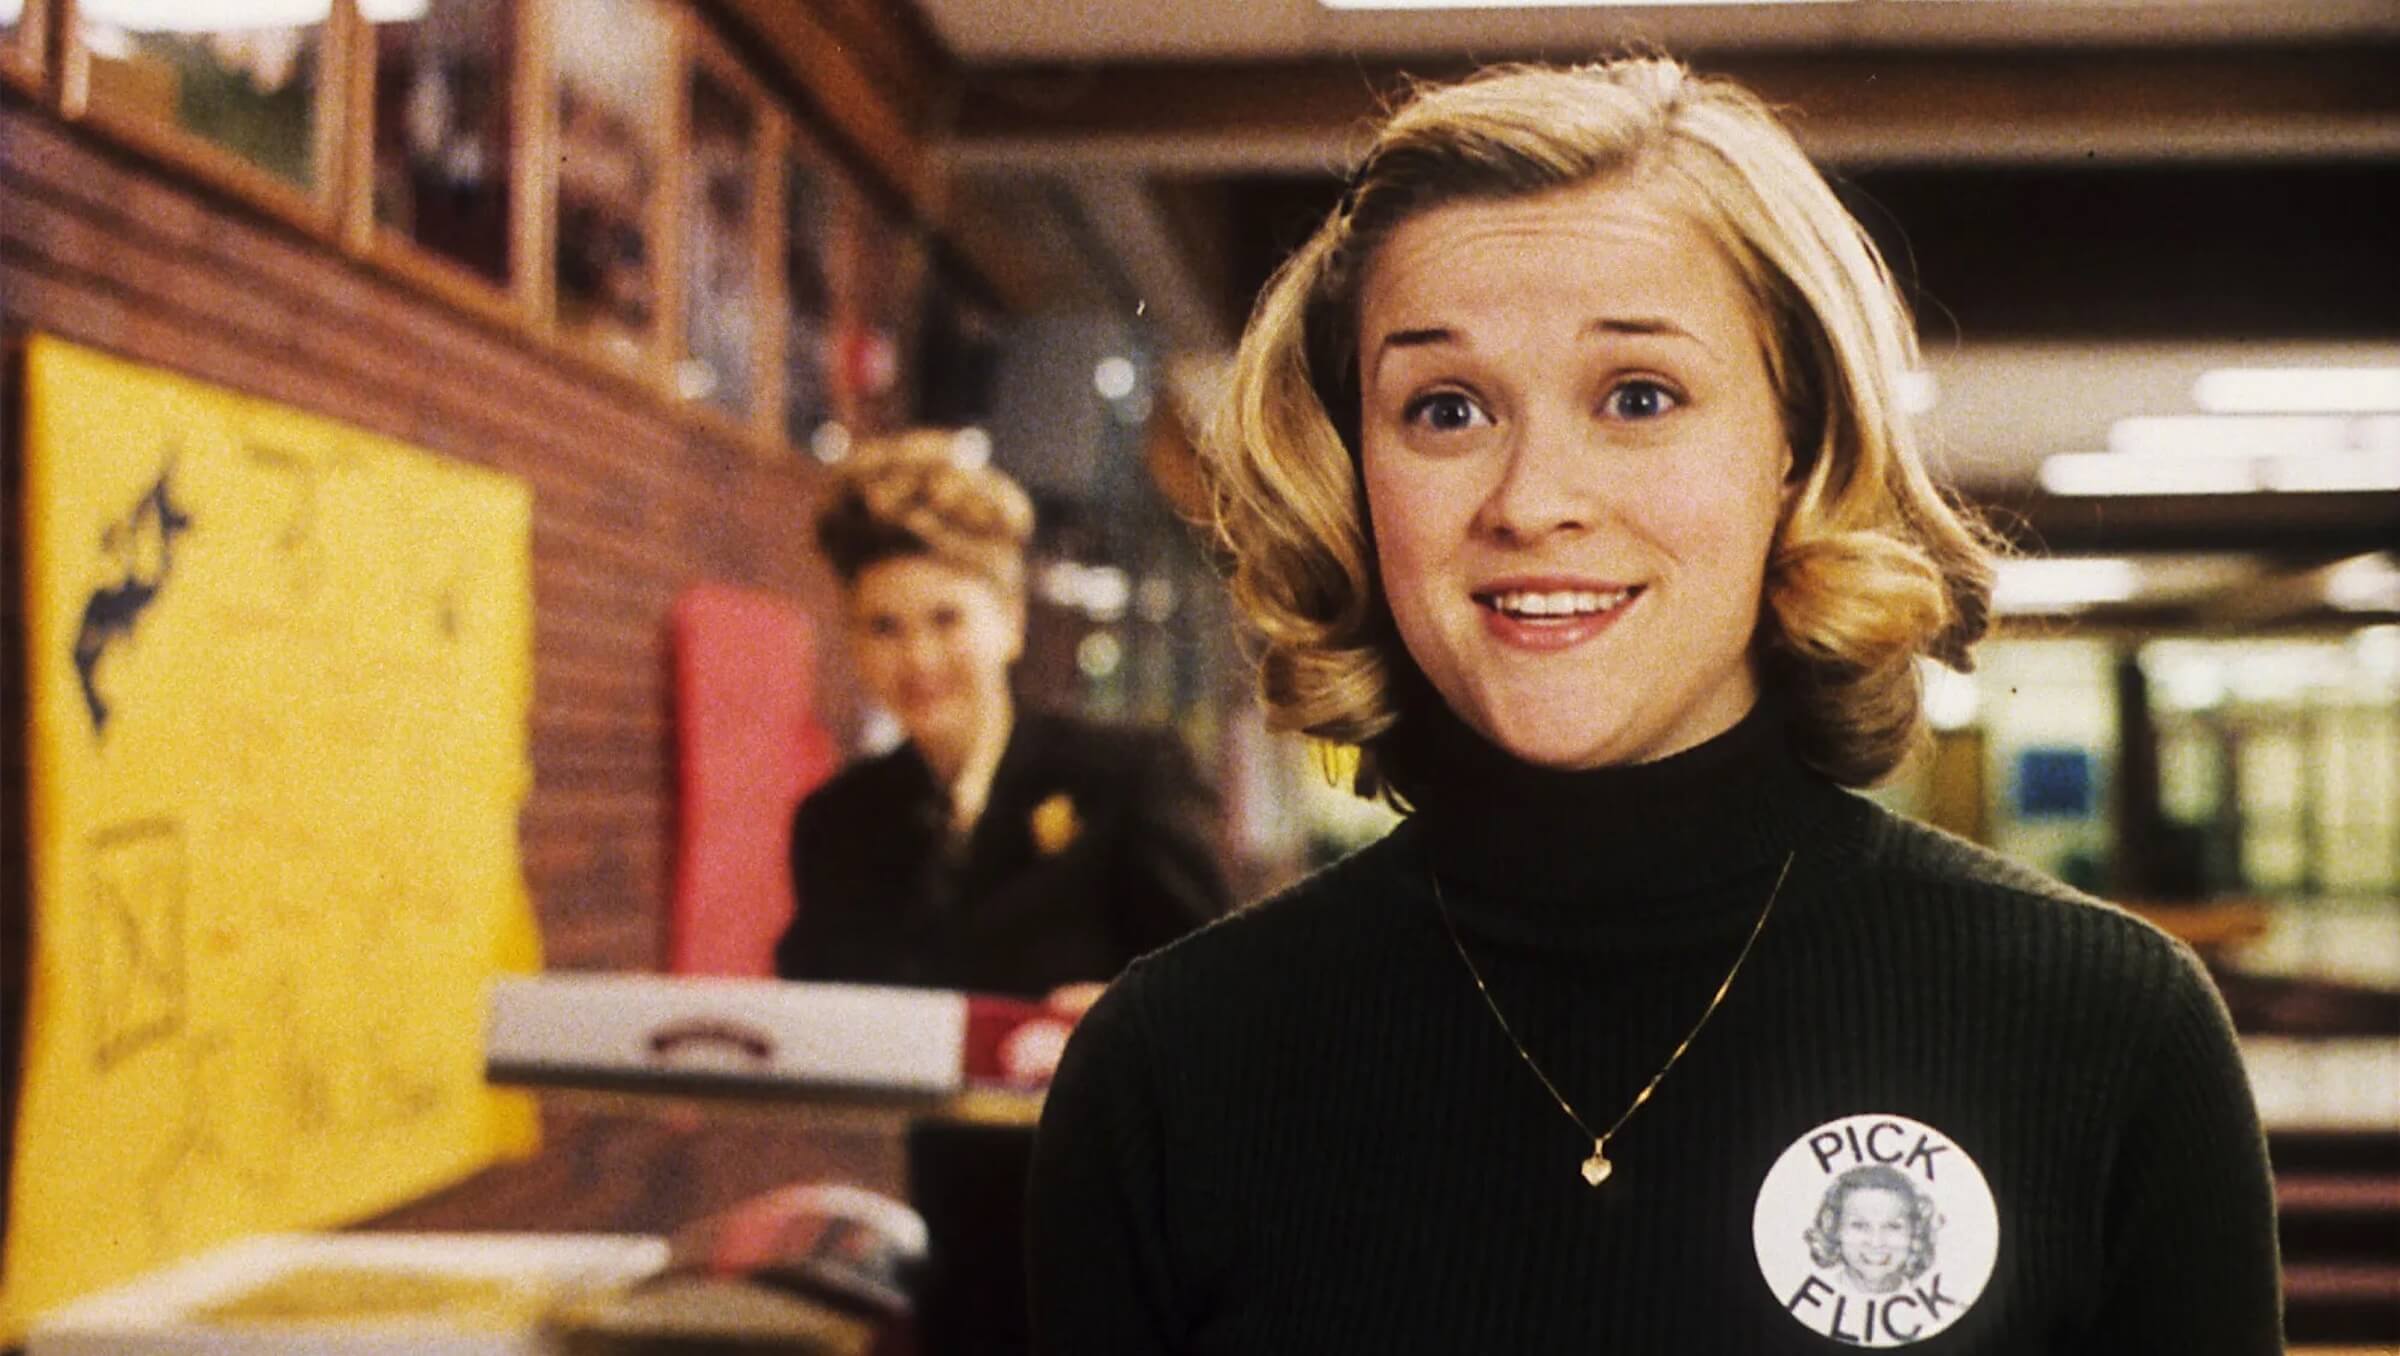 Tracy Enid Flick (Reese Witherspoon) in a black turtleneck talking to a teacher in 'Election'